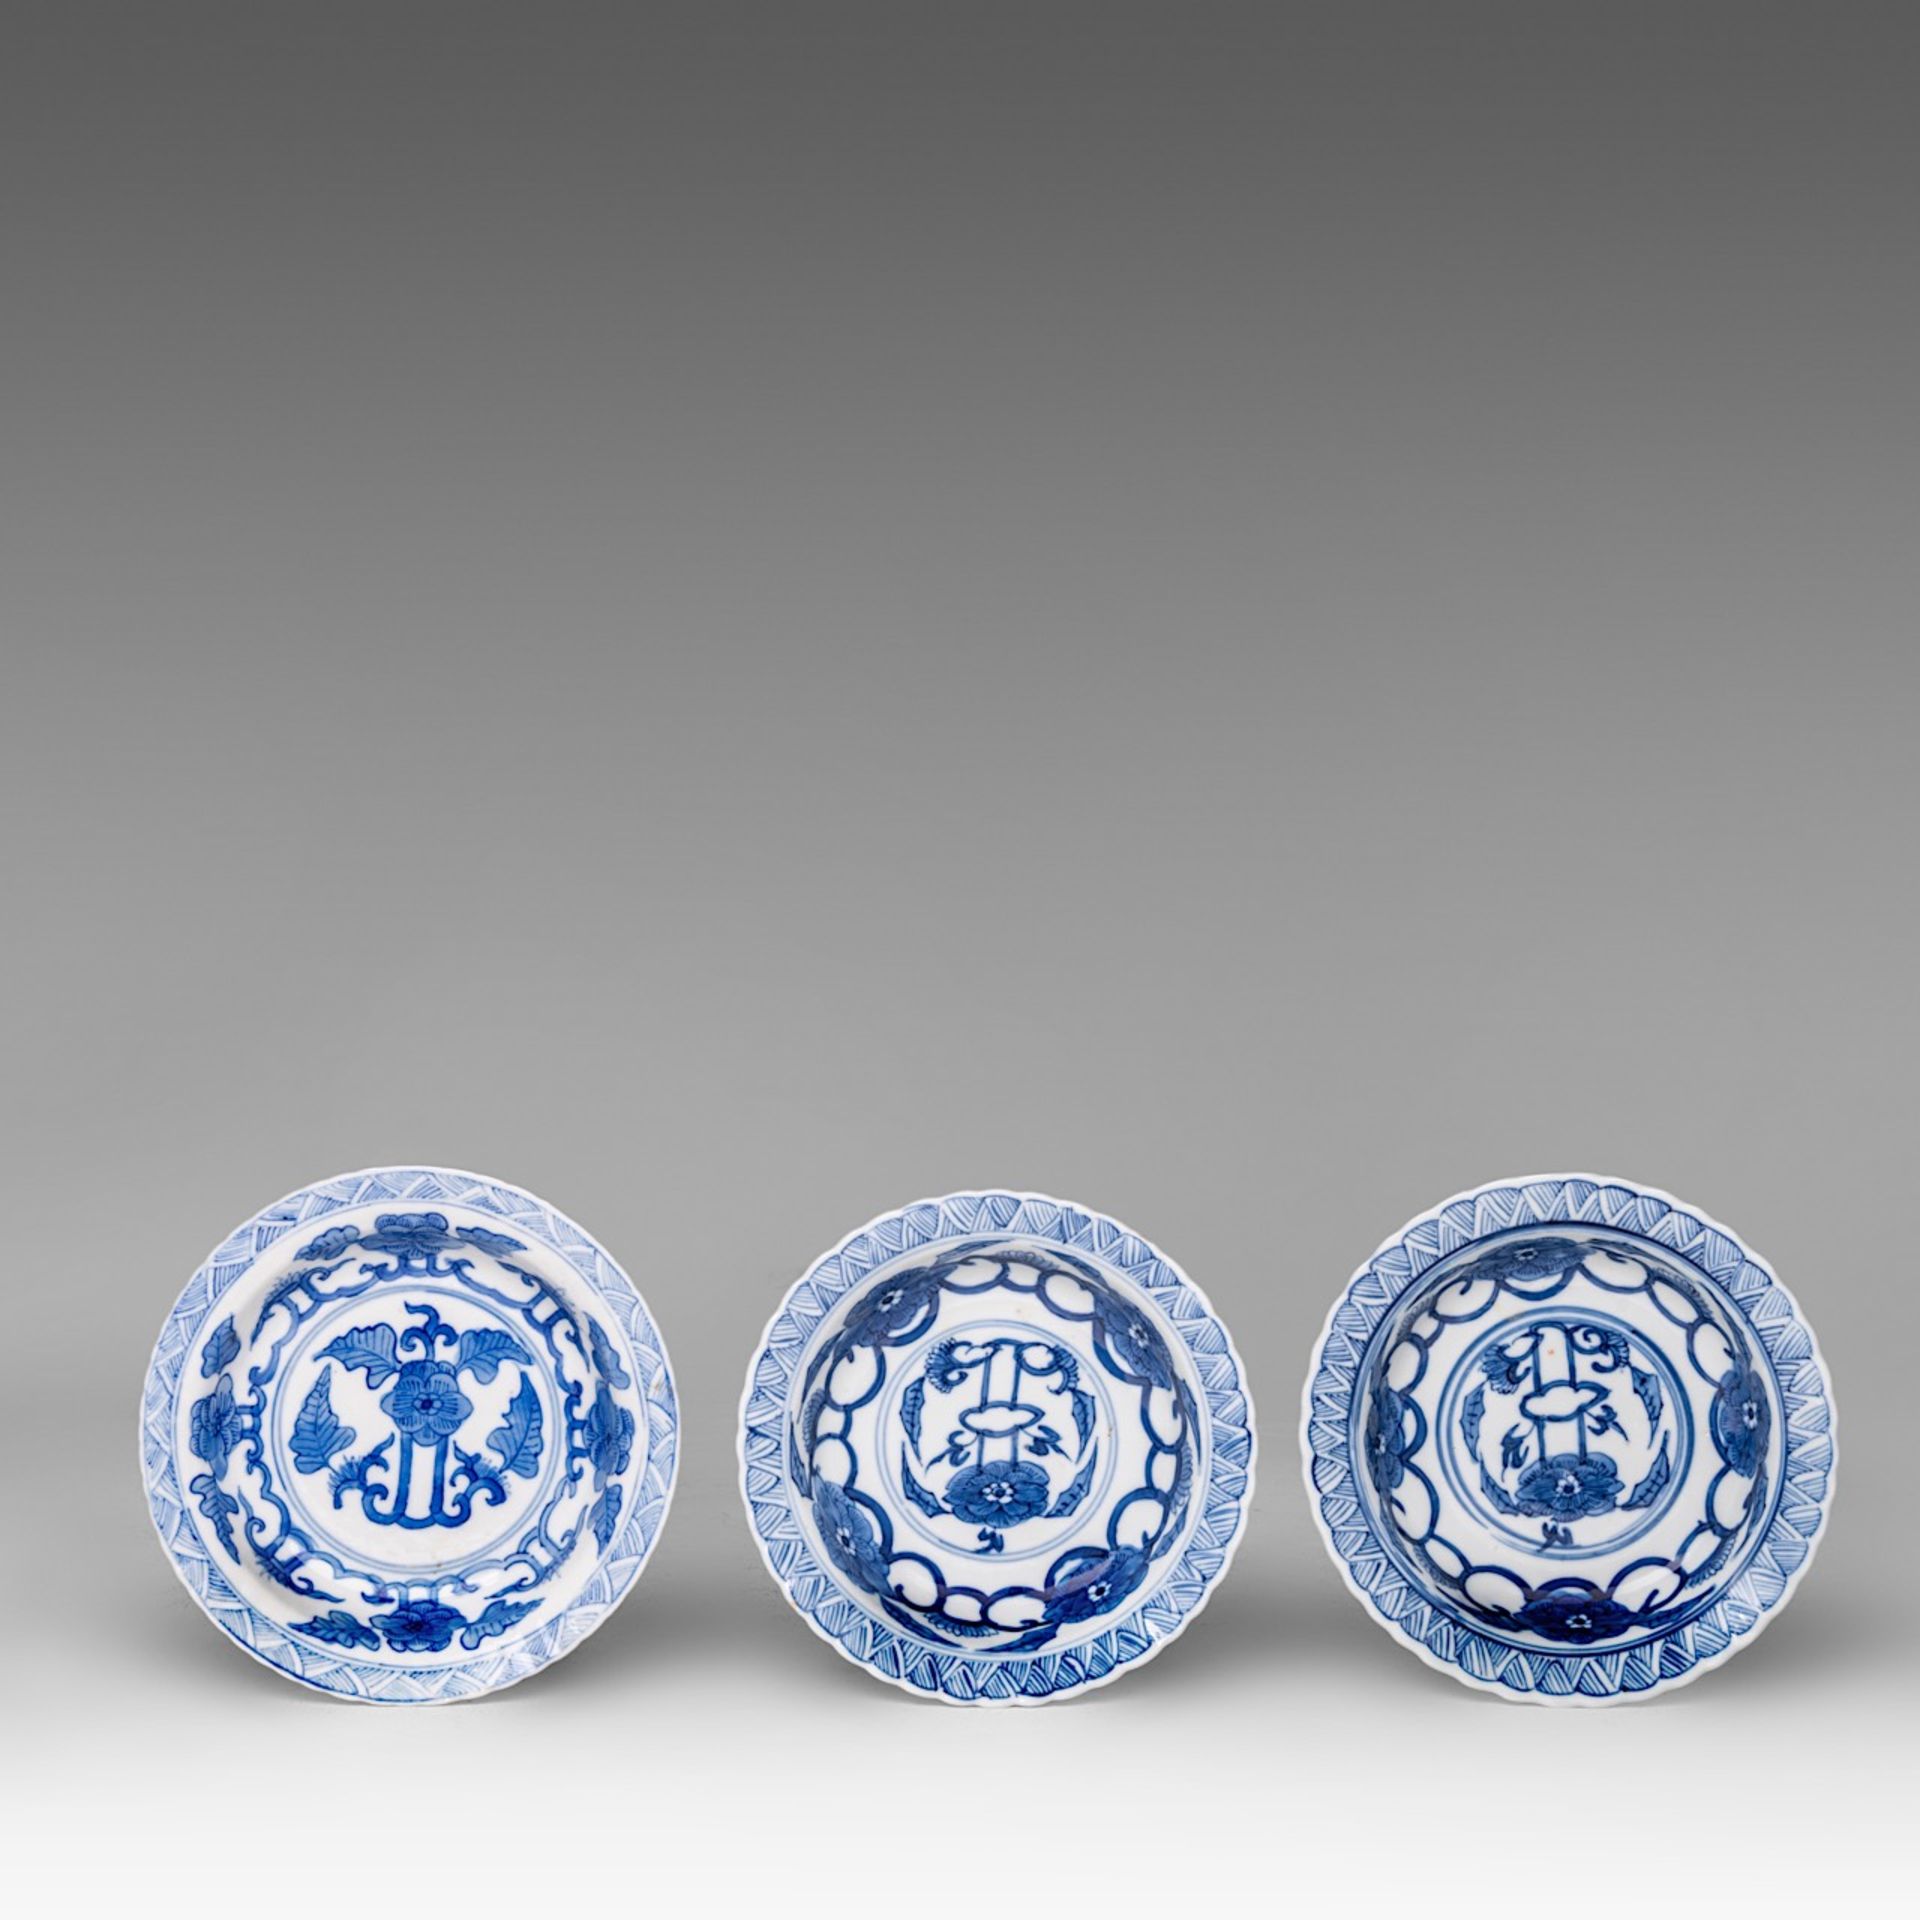 Six matching sets of Chinese blue and white floral decorated tea cups and saucers, Kangxi period, di - Image 16 of 17